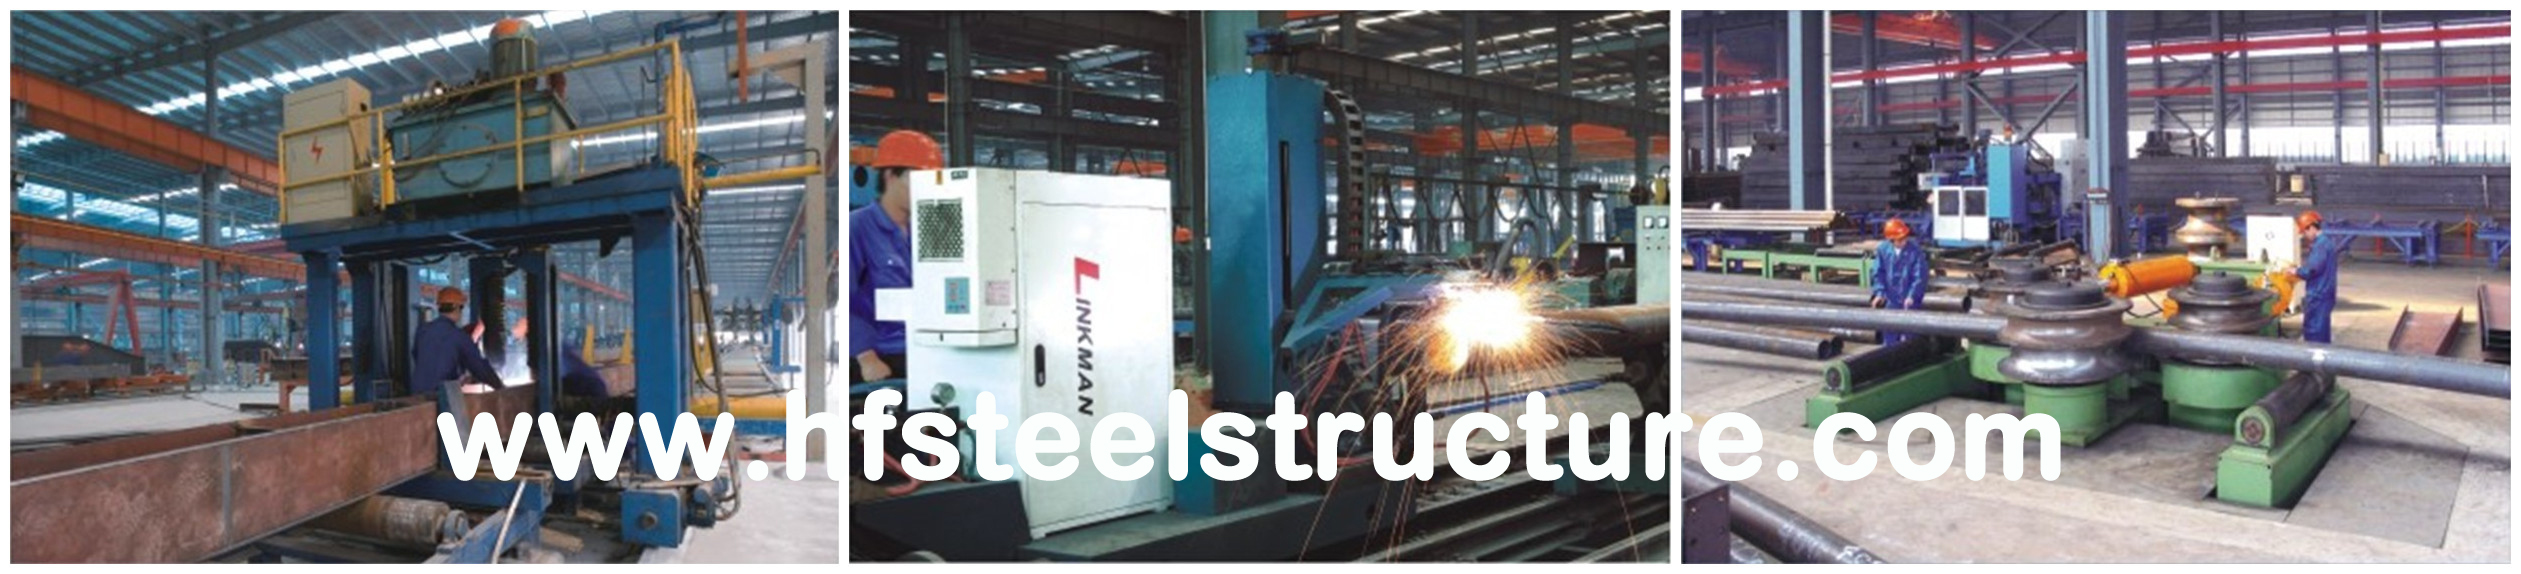 Structural Steel Buildings Frames Fabricated By Cutting , Drilling , Welding